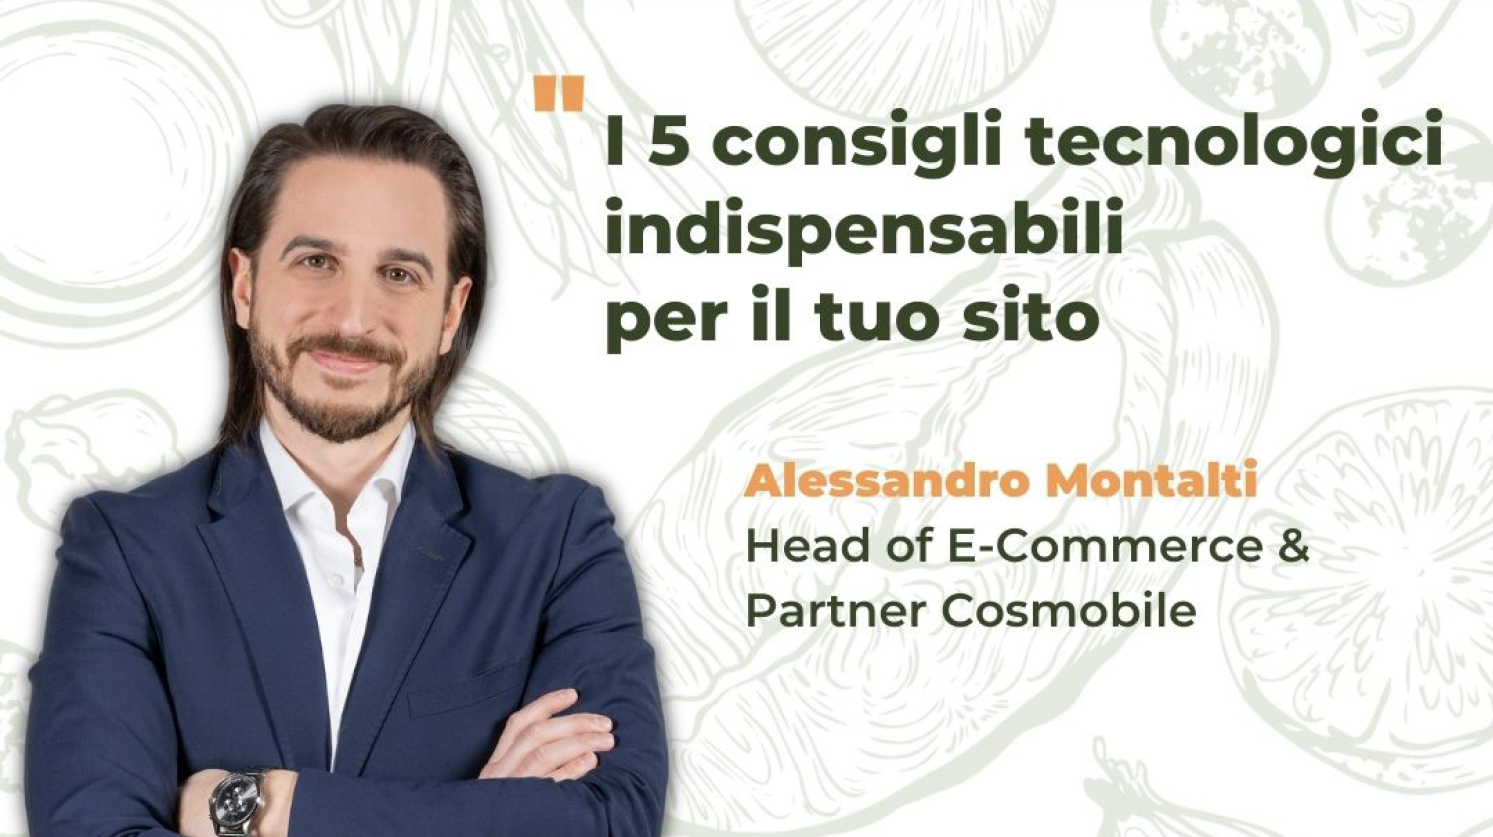 evento ecommerce food conference fico cosmobile